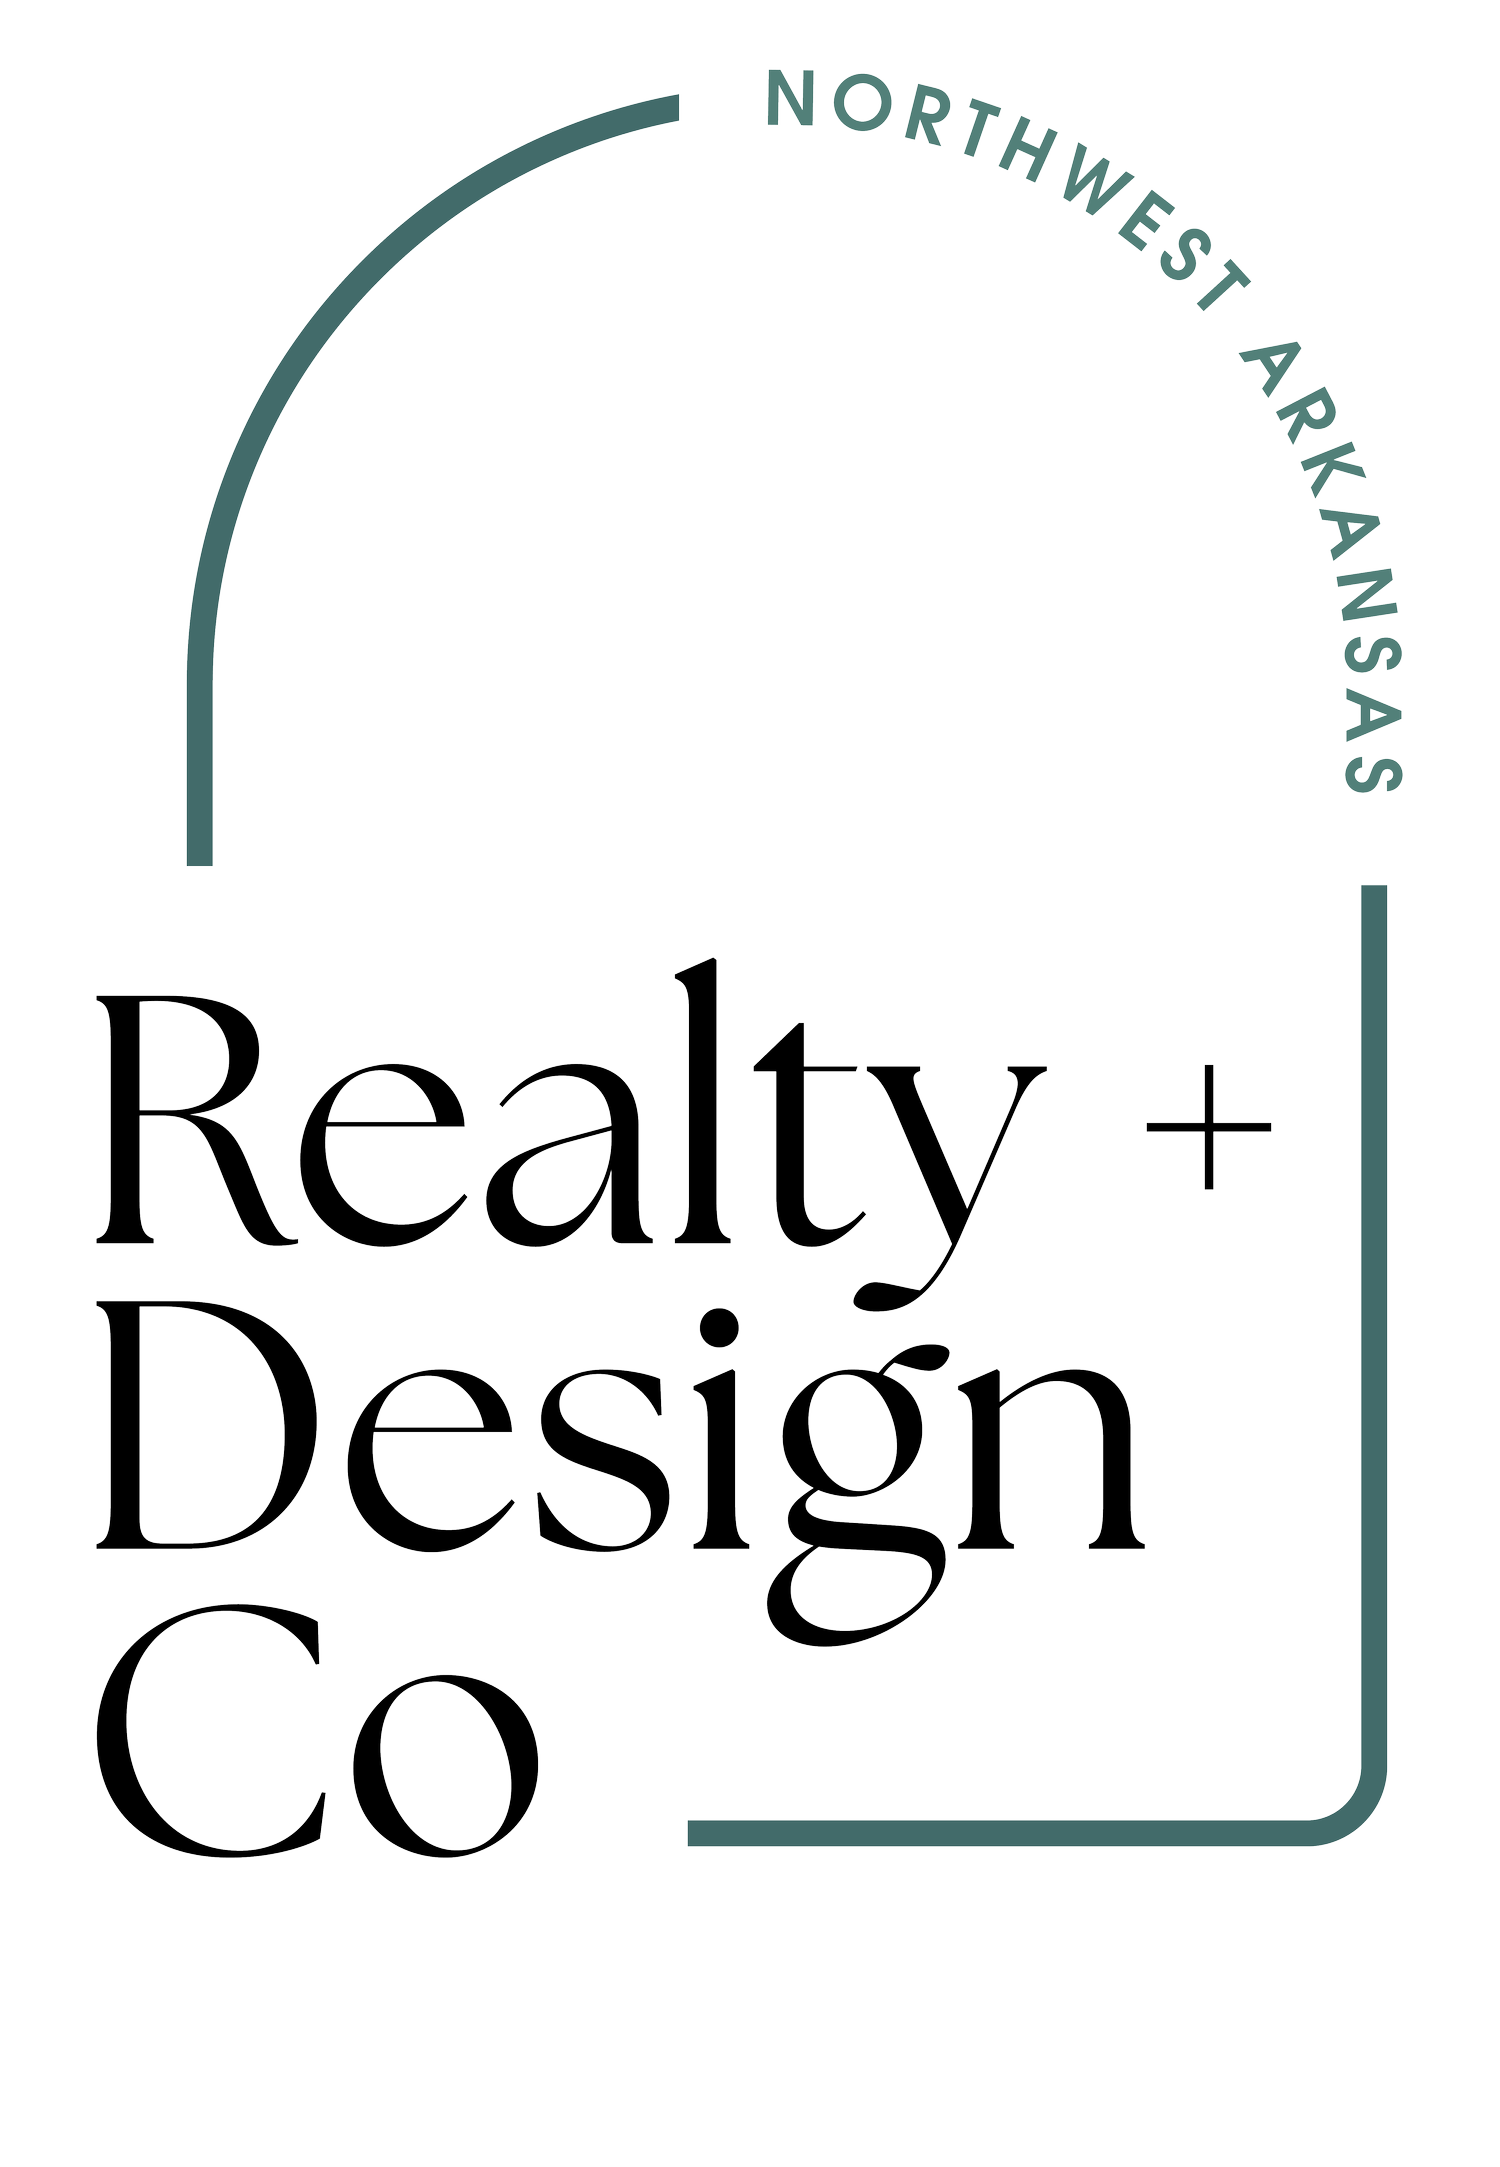 Realty + Design Co.